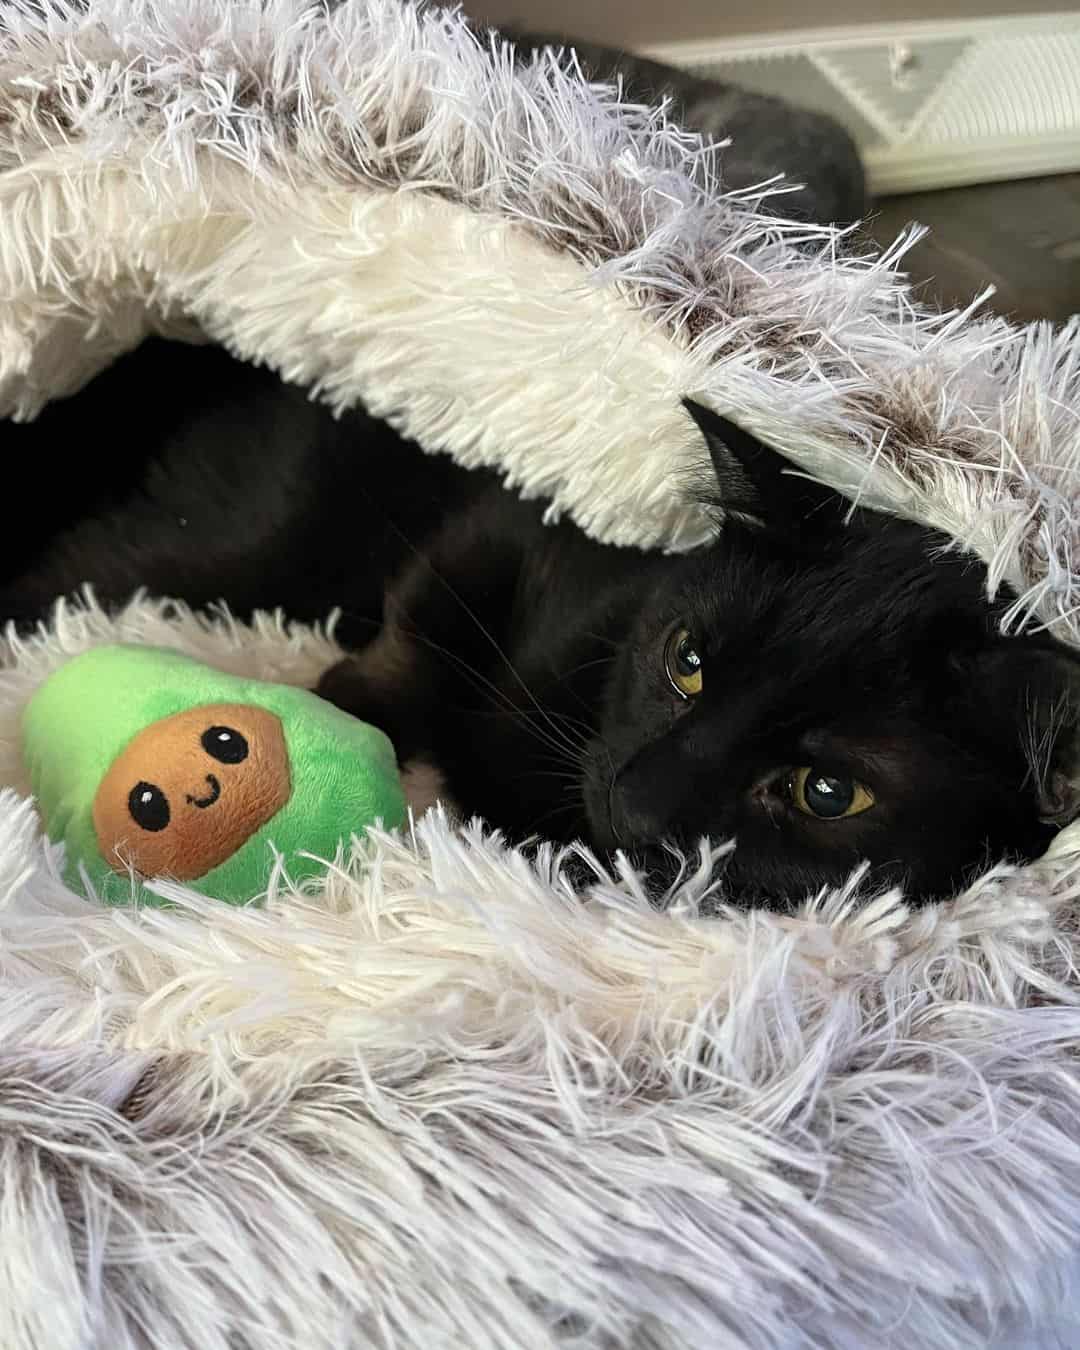 a black cat wrapped in a blanket lies next to his toy